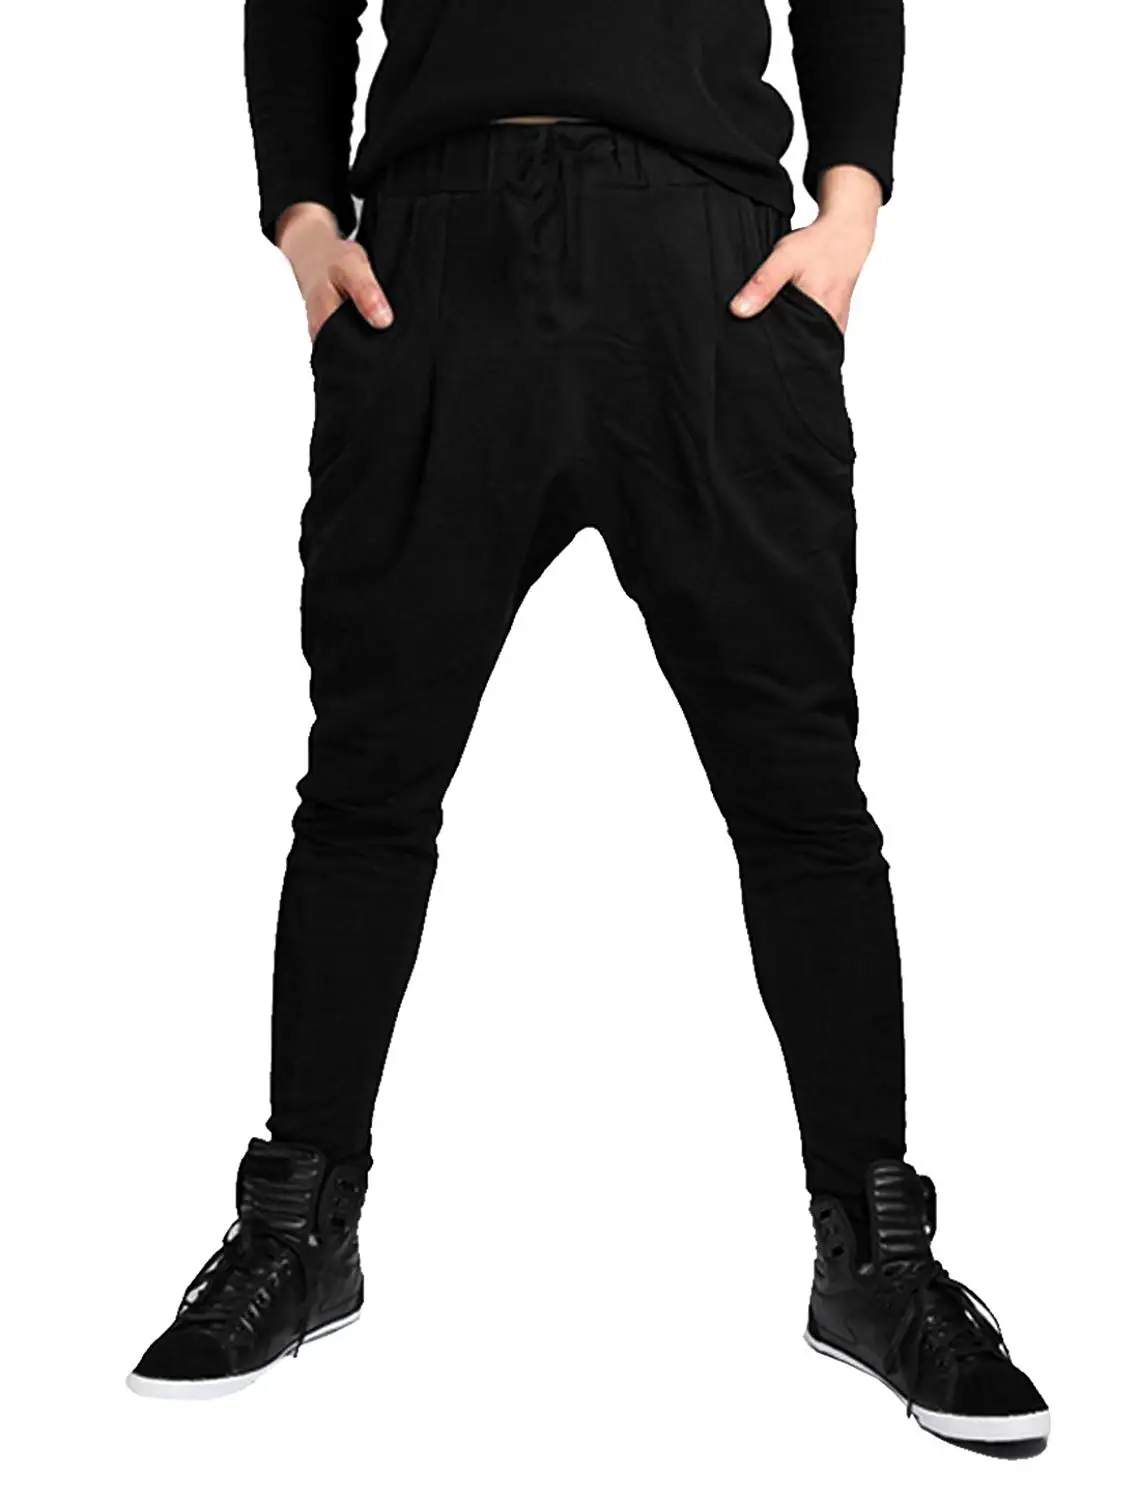 Cheap Baggy Tapered Pants, find Baggy Tapered Pants deals on line at ...